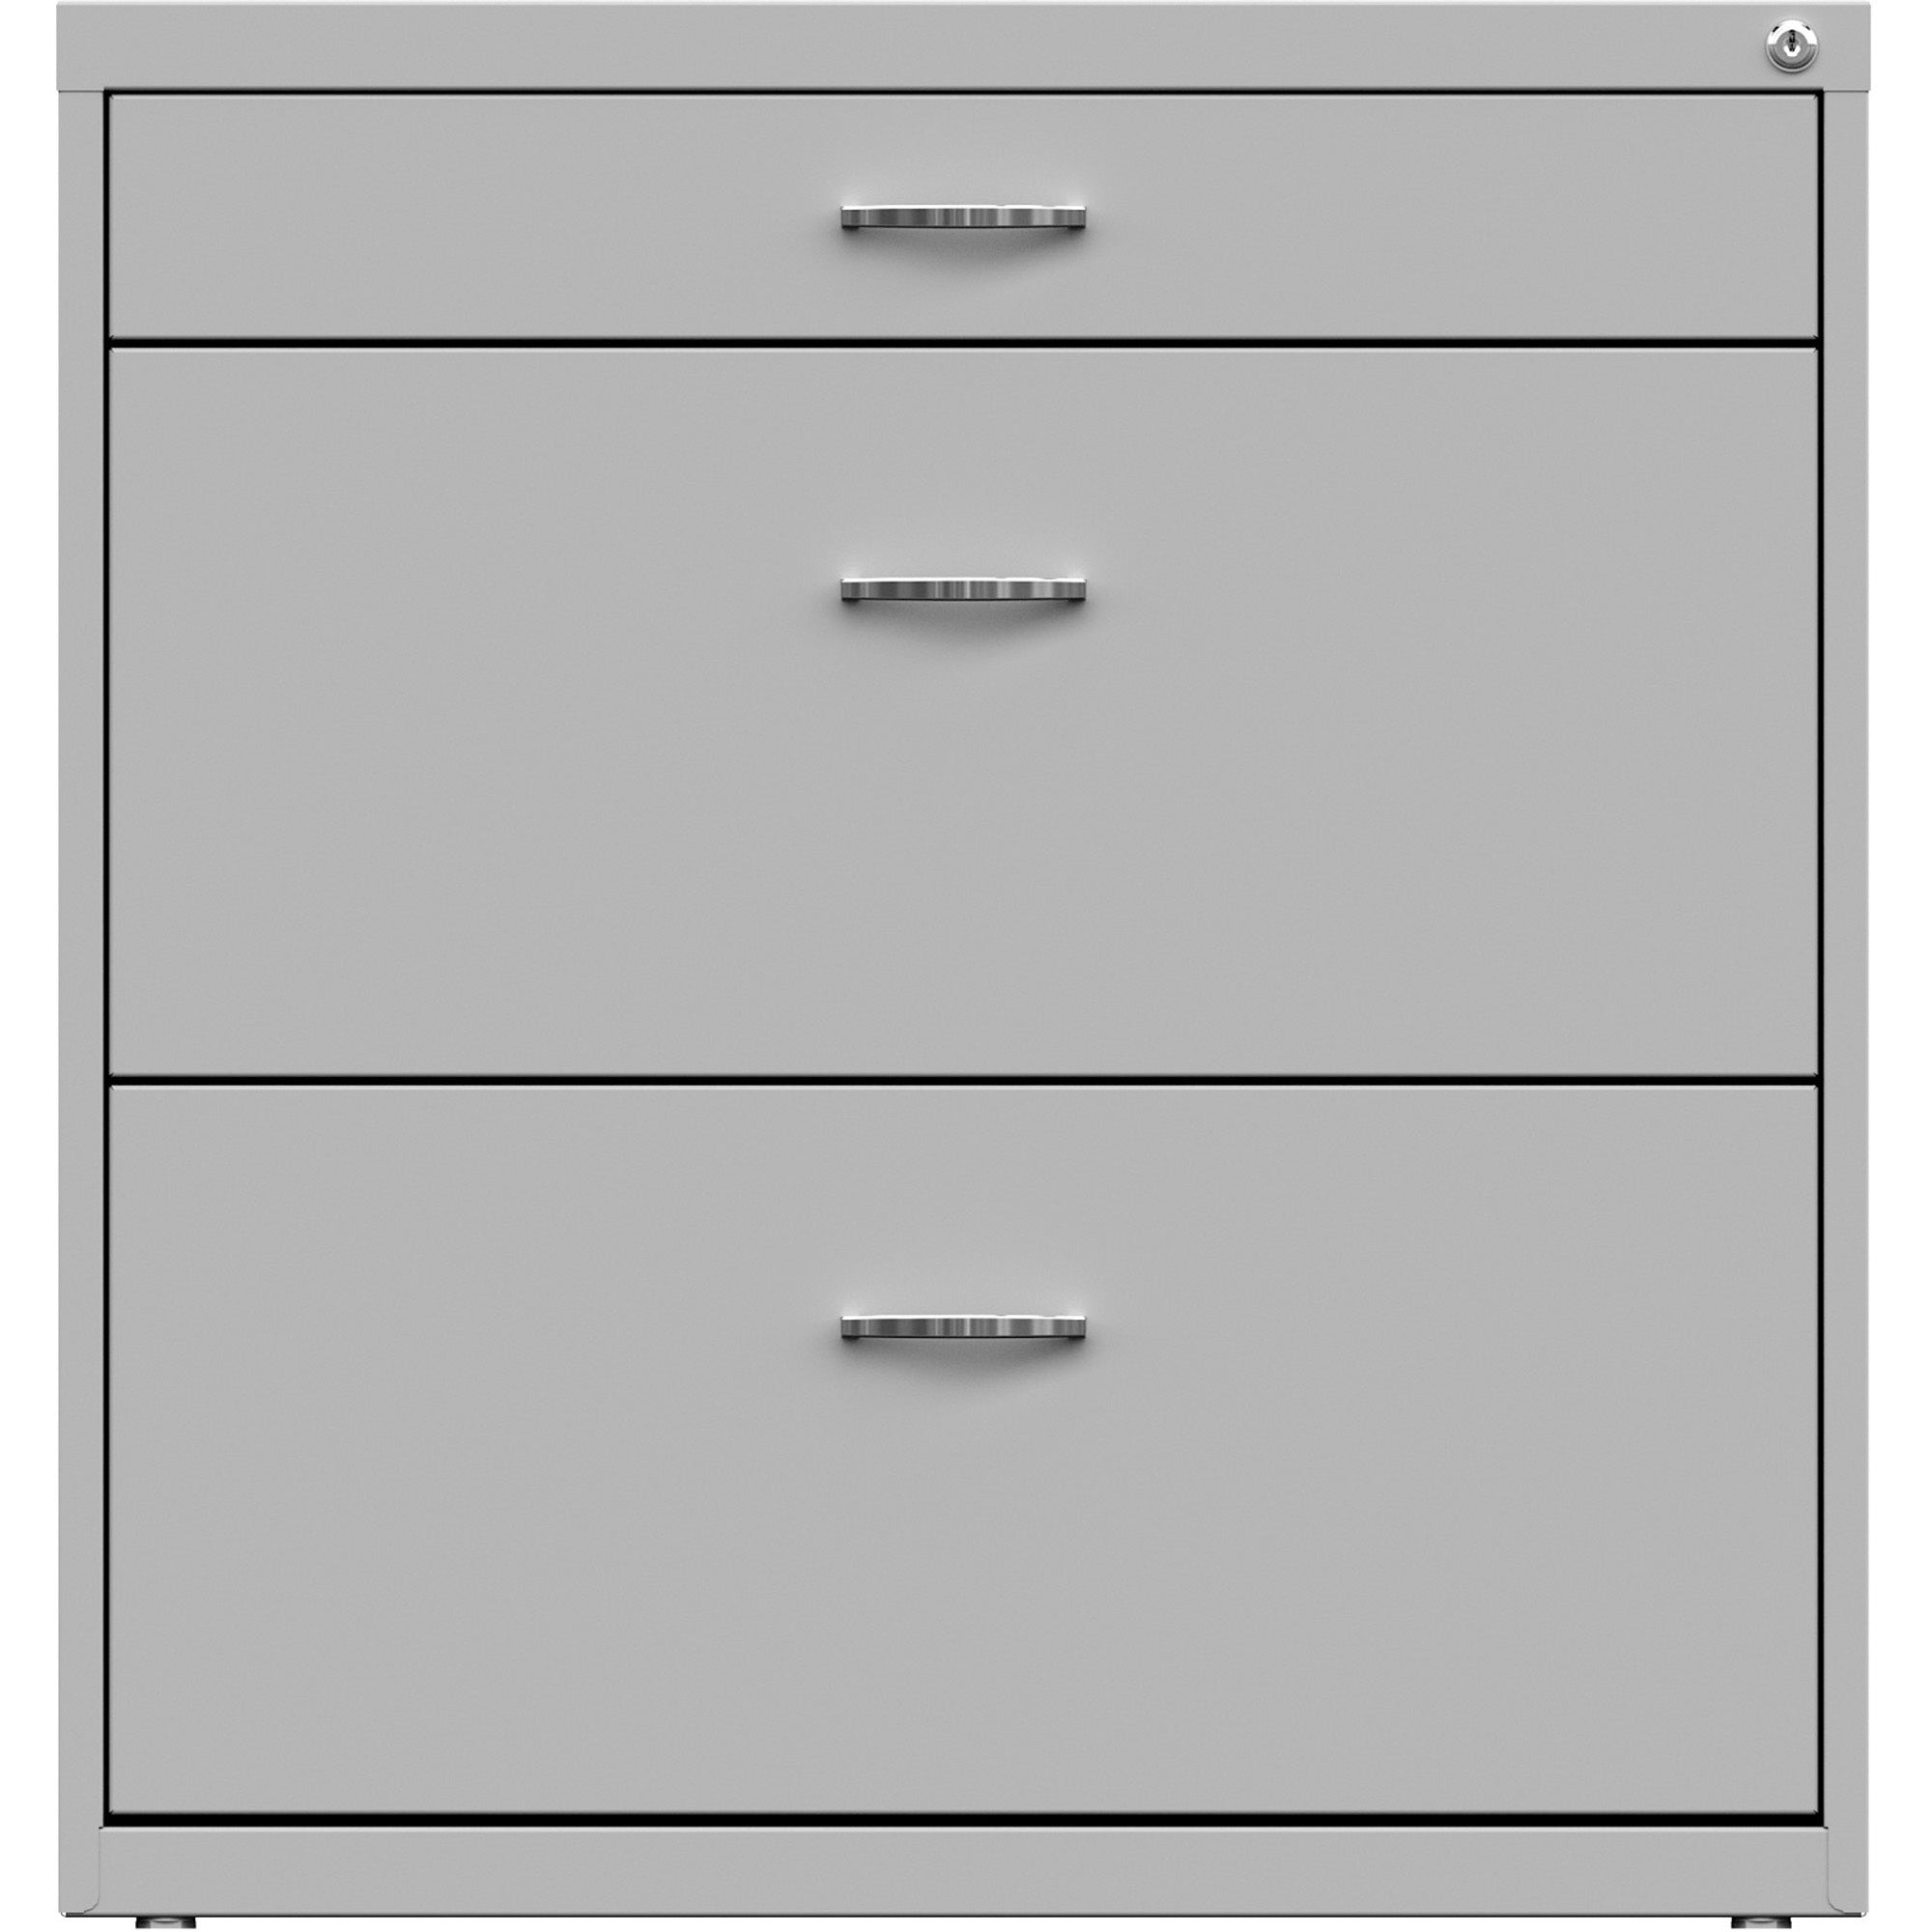 nusparc-pencil-drawer-lateral-file-30-x-176-x-317-2-x-drawers-for-file-pencil-letter-lateral-interlocking-anti-tip-ball-bearing-slide-ball-bearing-suspension-removable-lock-durable-nonporous-surface-adjustable-leveler-silve_nprlf318bbsr - 2